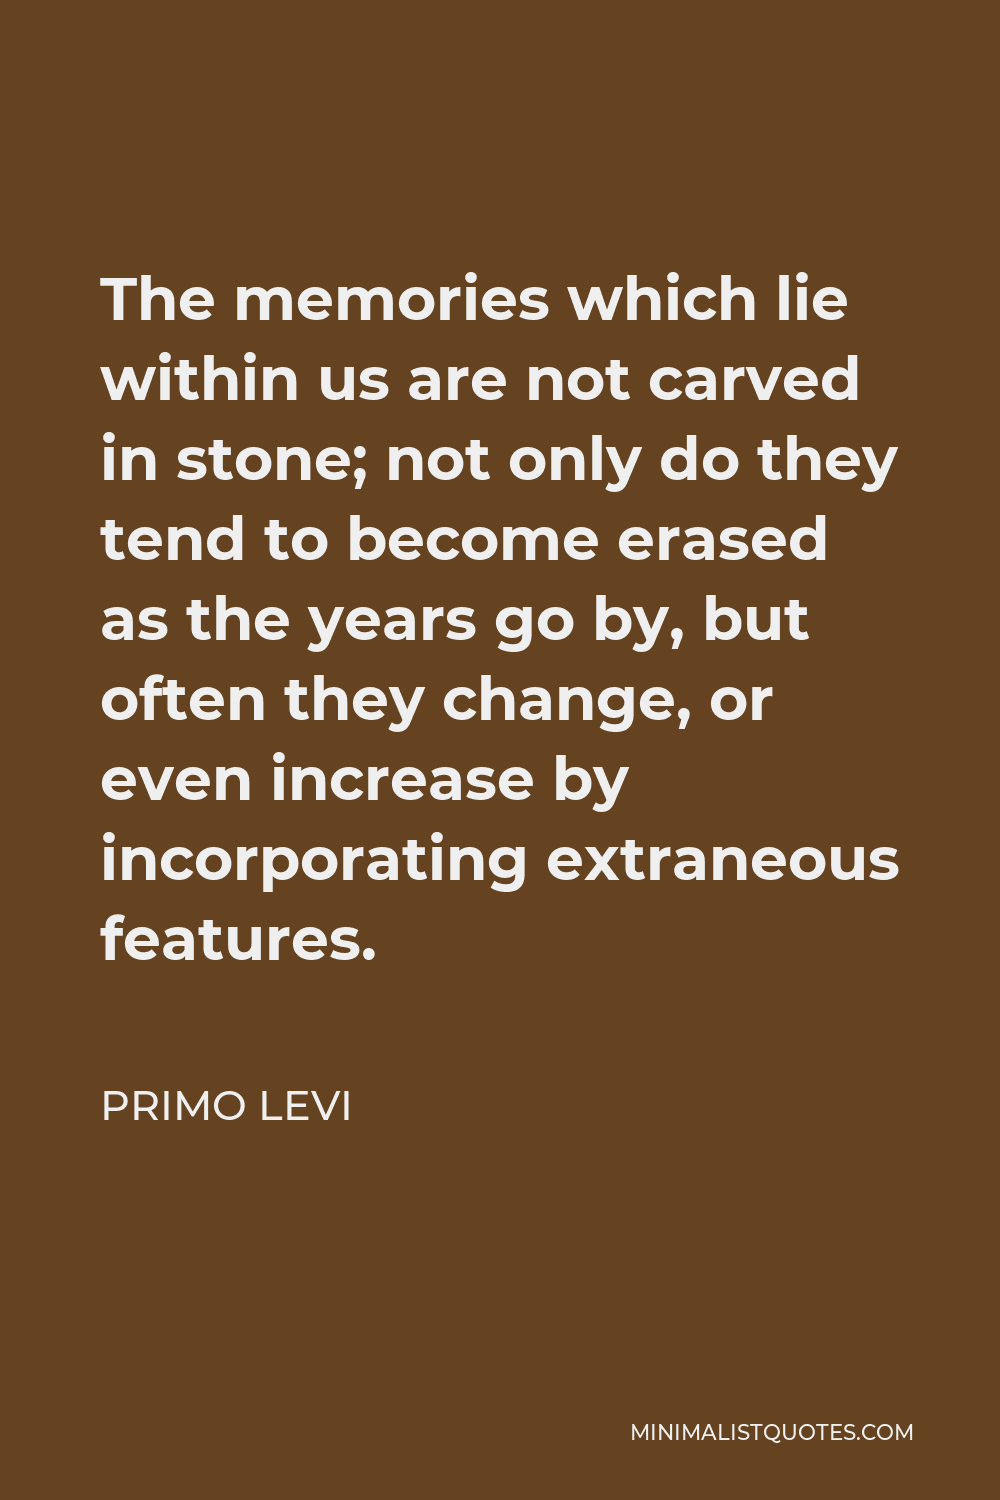 Primo Levi Quote - The memories which lie within us are not carved in stone; not only do they tend to become erased as the years go by, but often they change, or even increase by incorporating extraneous features.